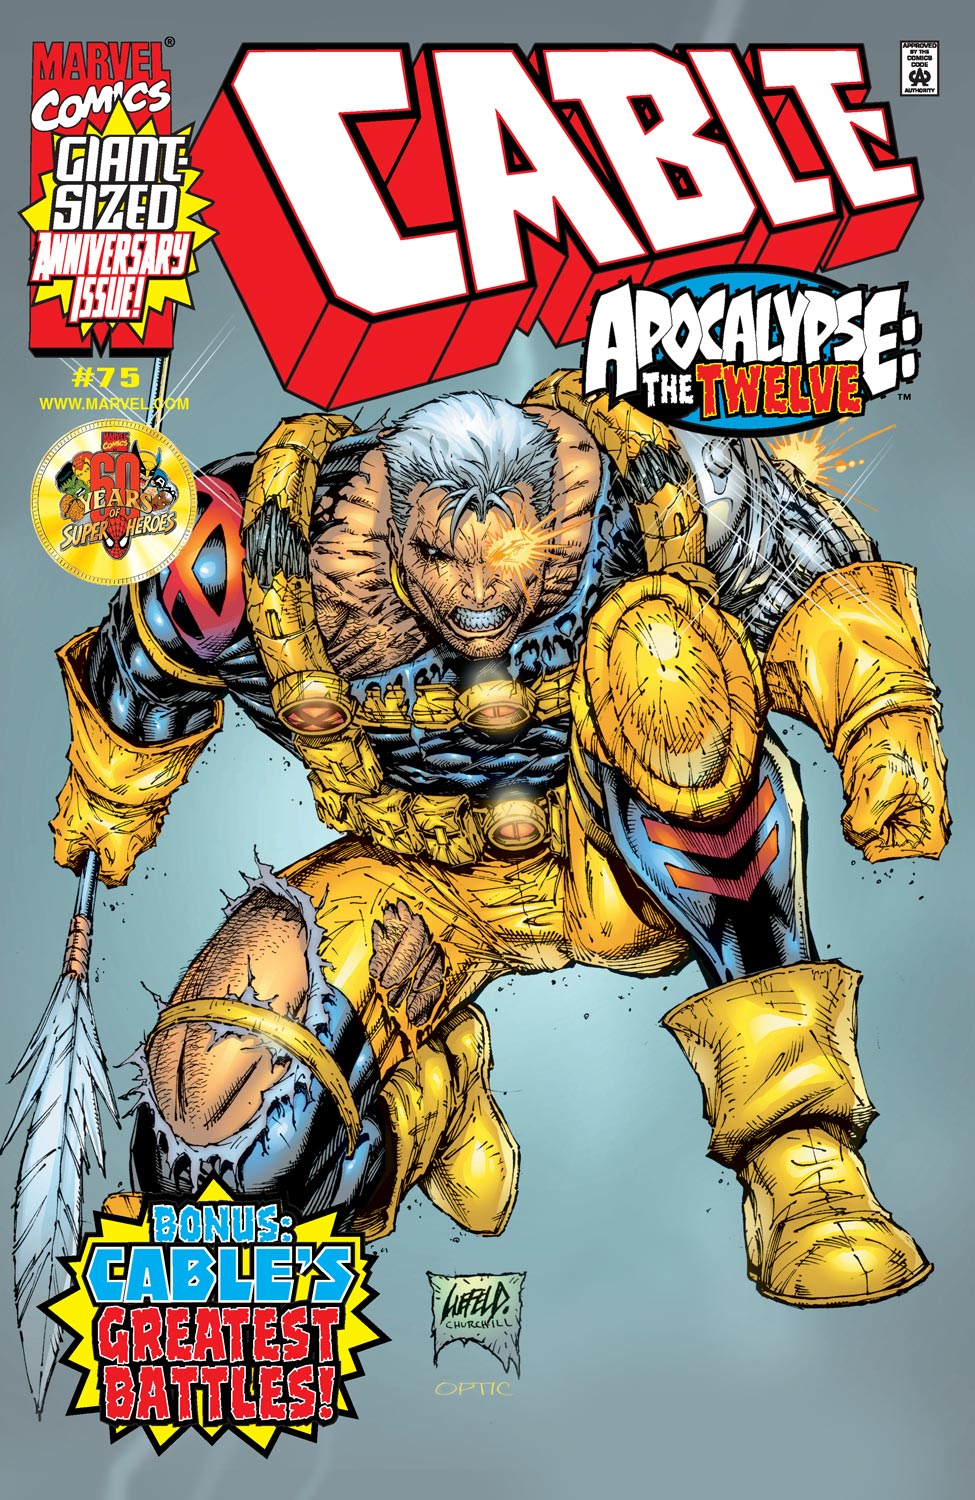 Cable (1993) #75